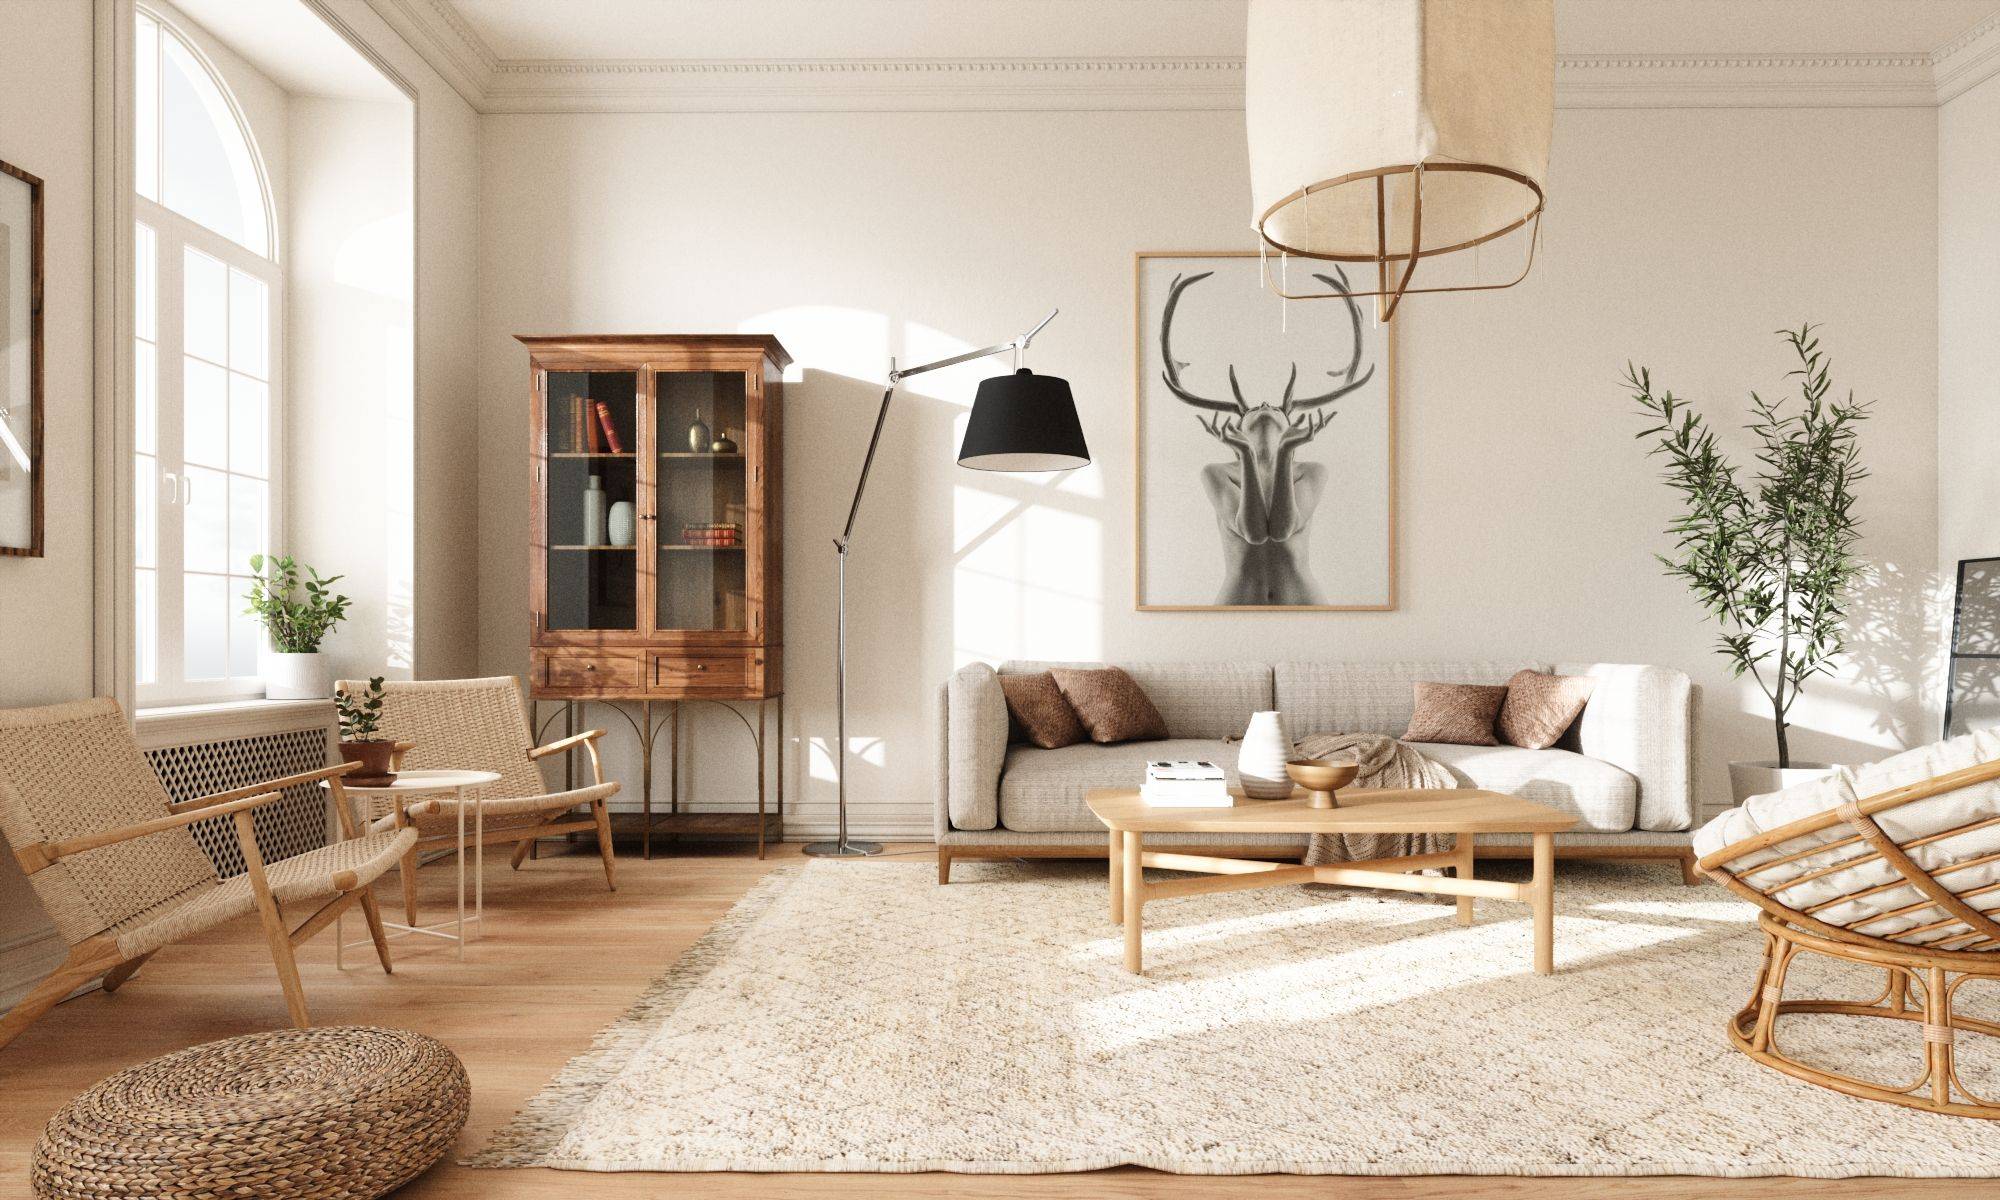 Scandinavian elements and neutral colors (from Anthology Creatives)